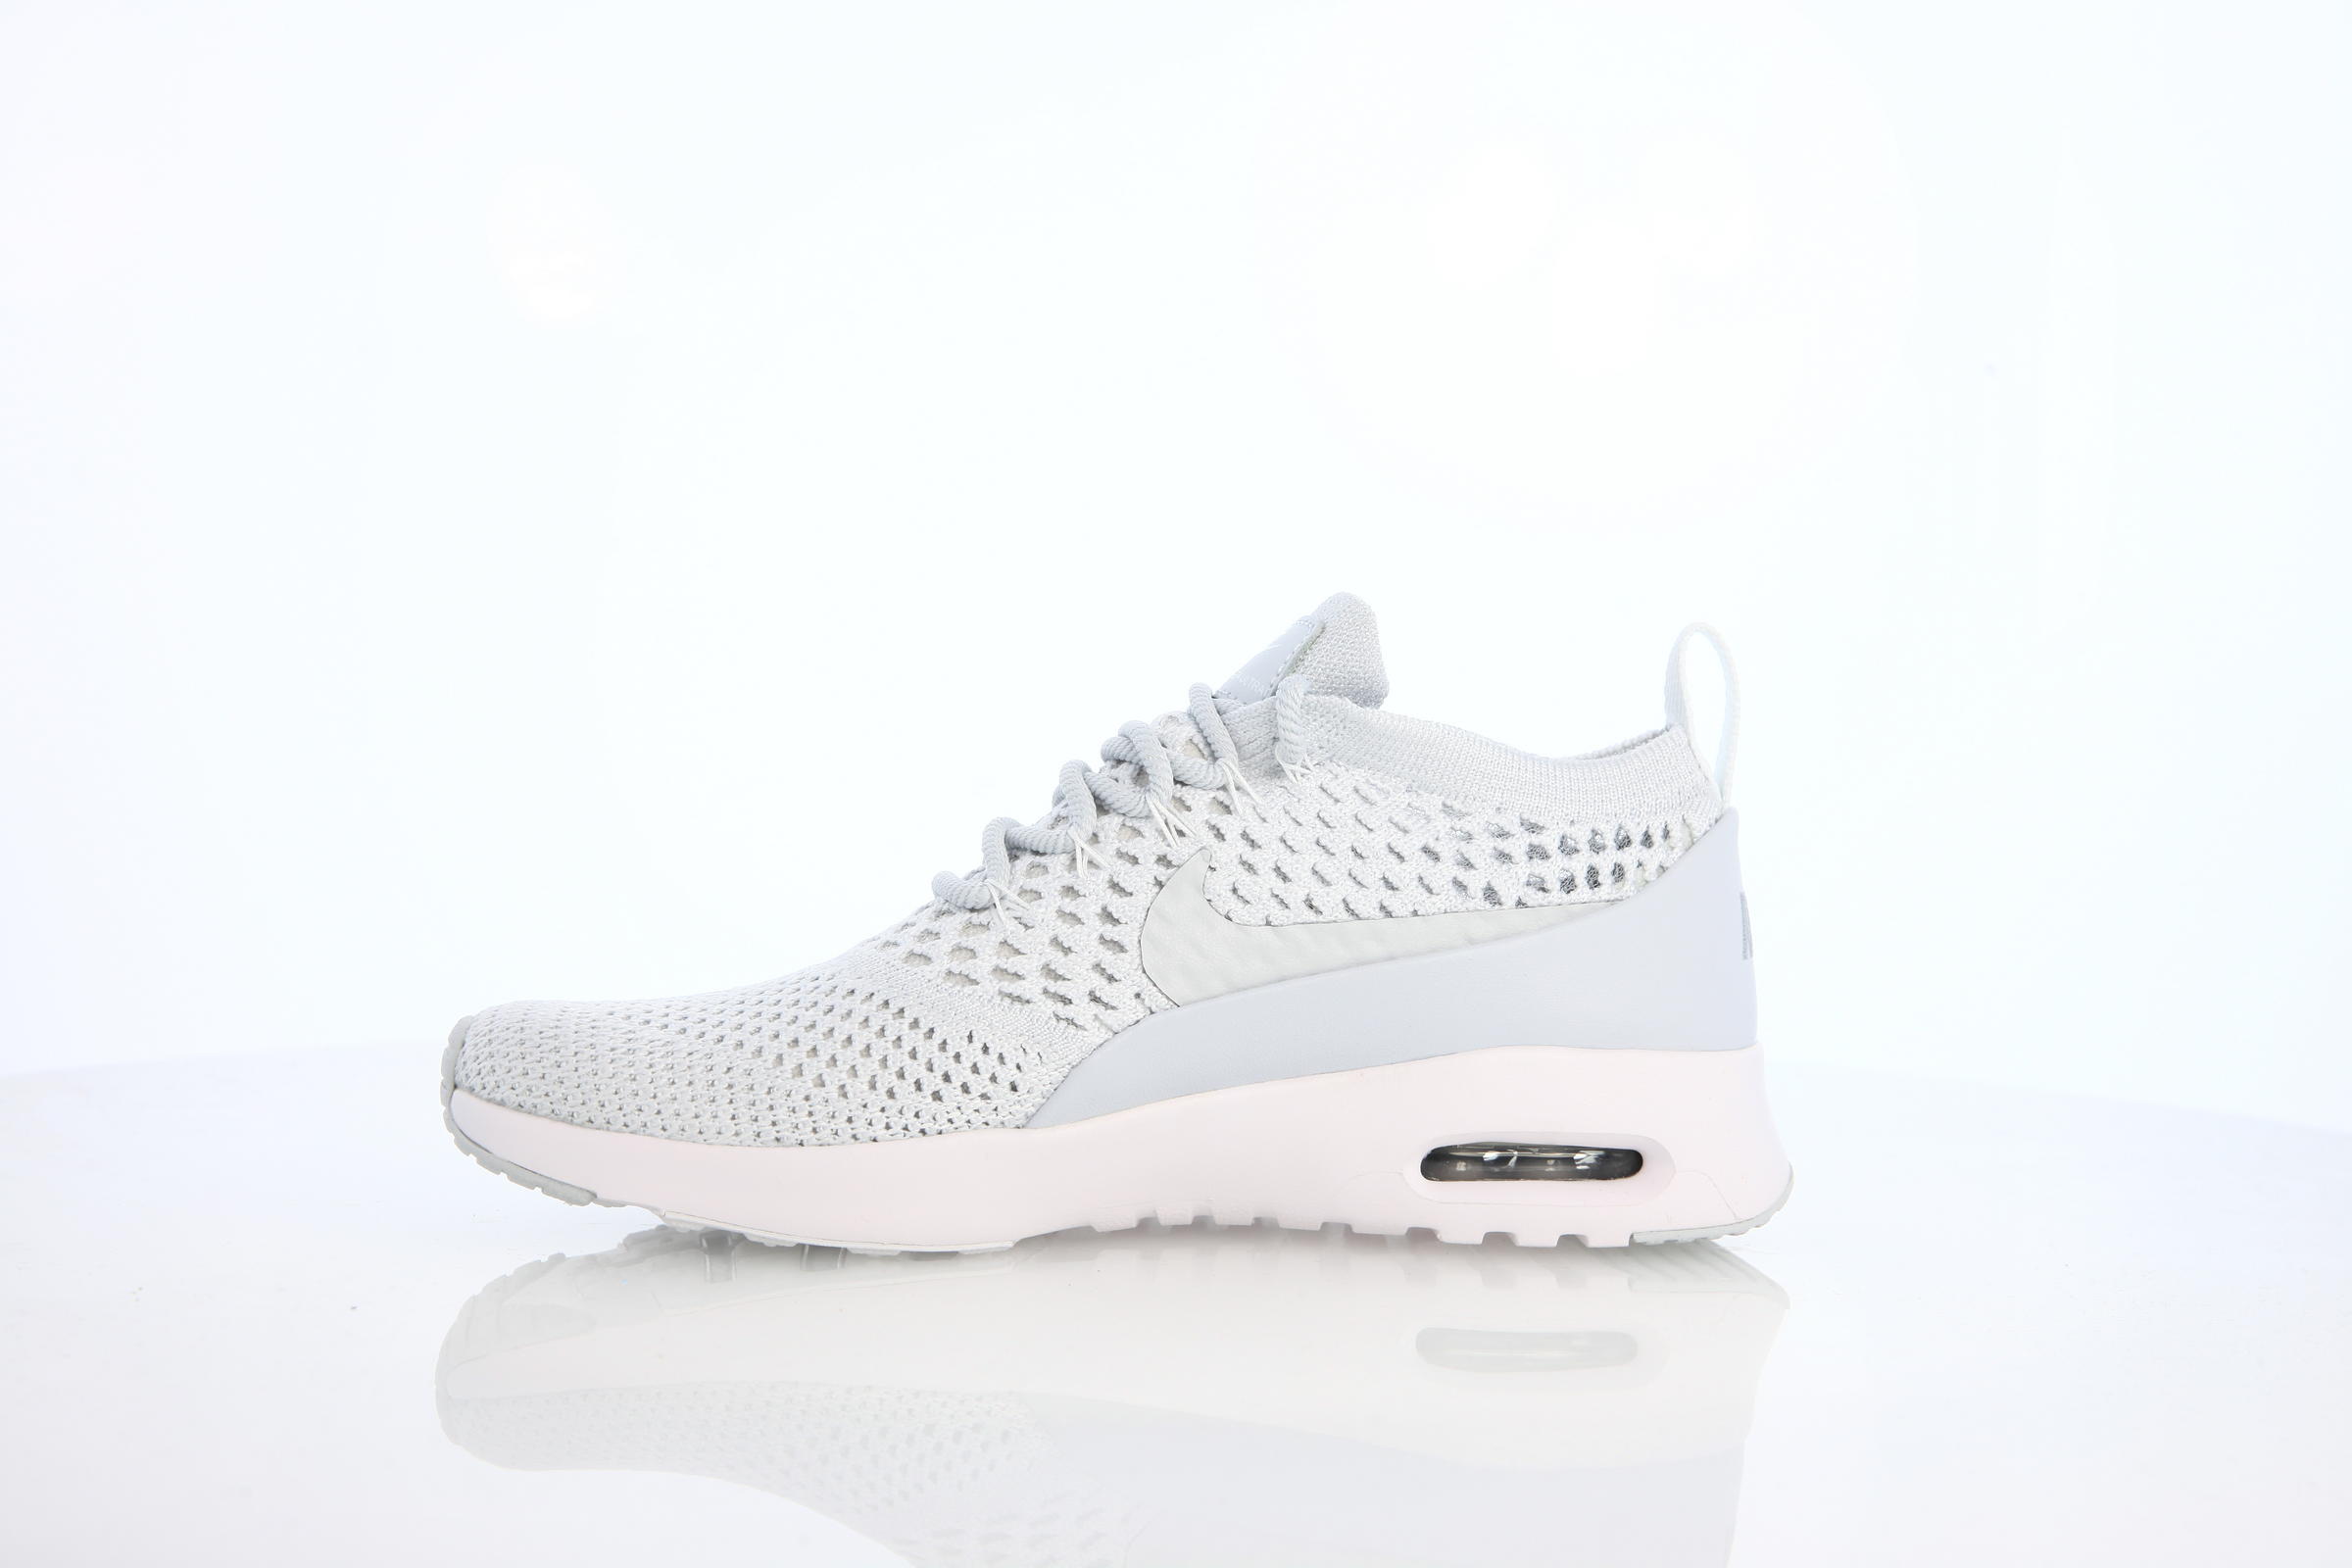 Nike Wmns Air Max Thea Ultra Flyknit "Pure Platinum"